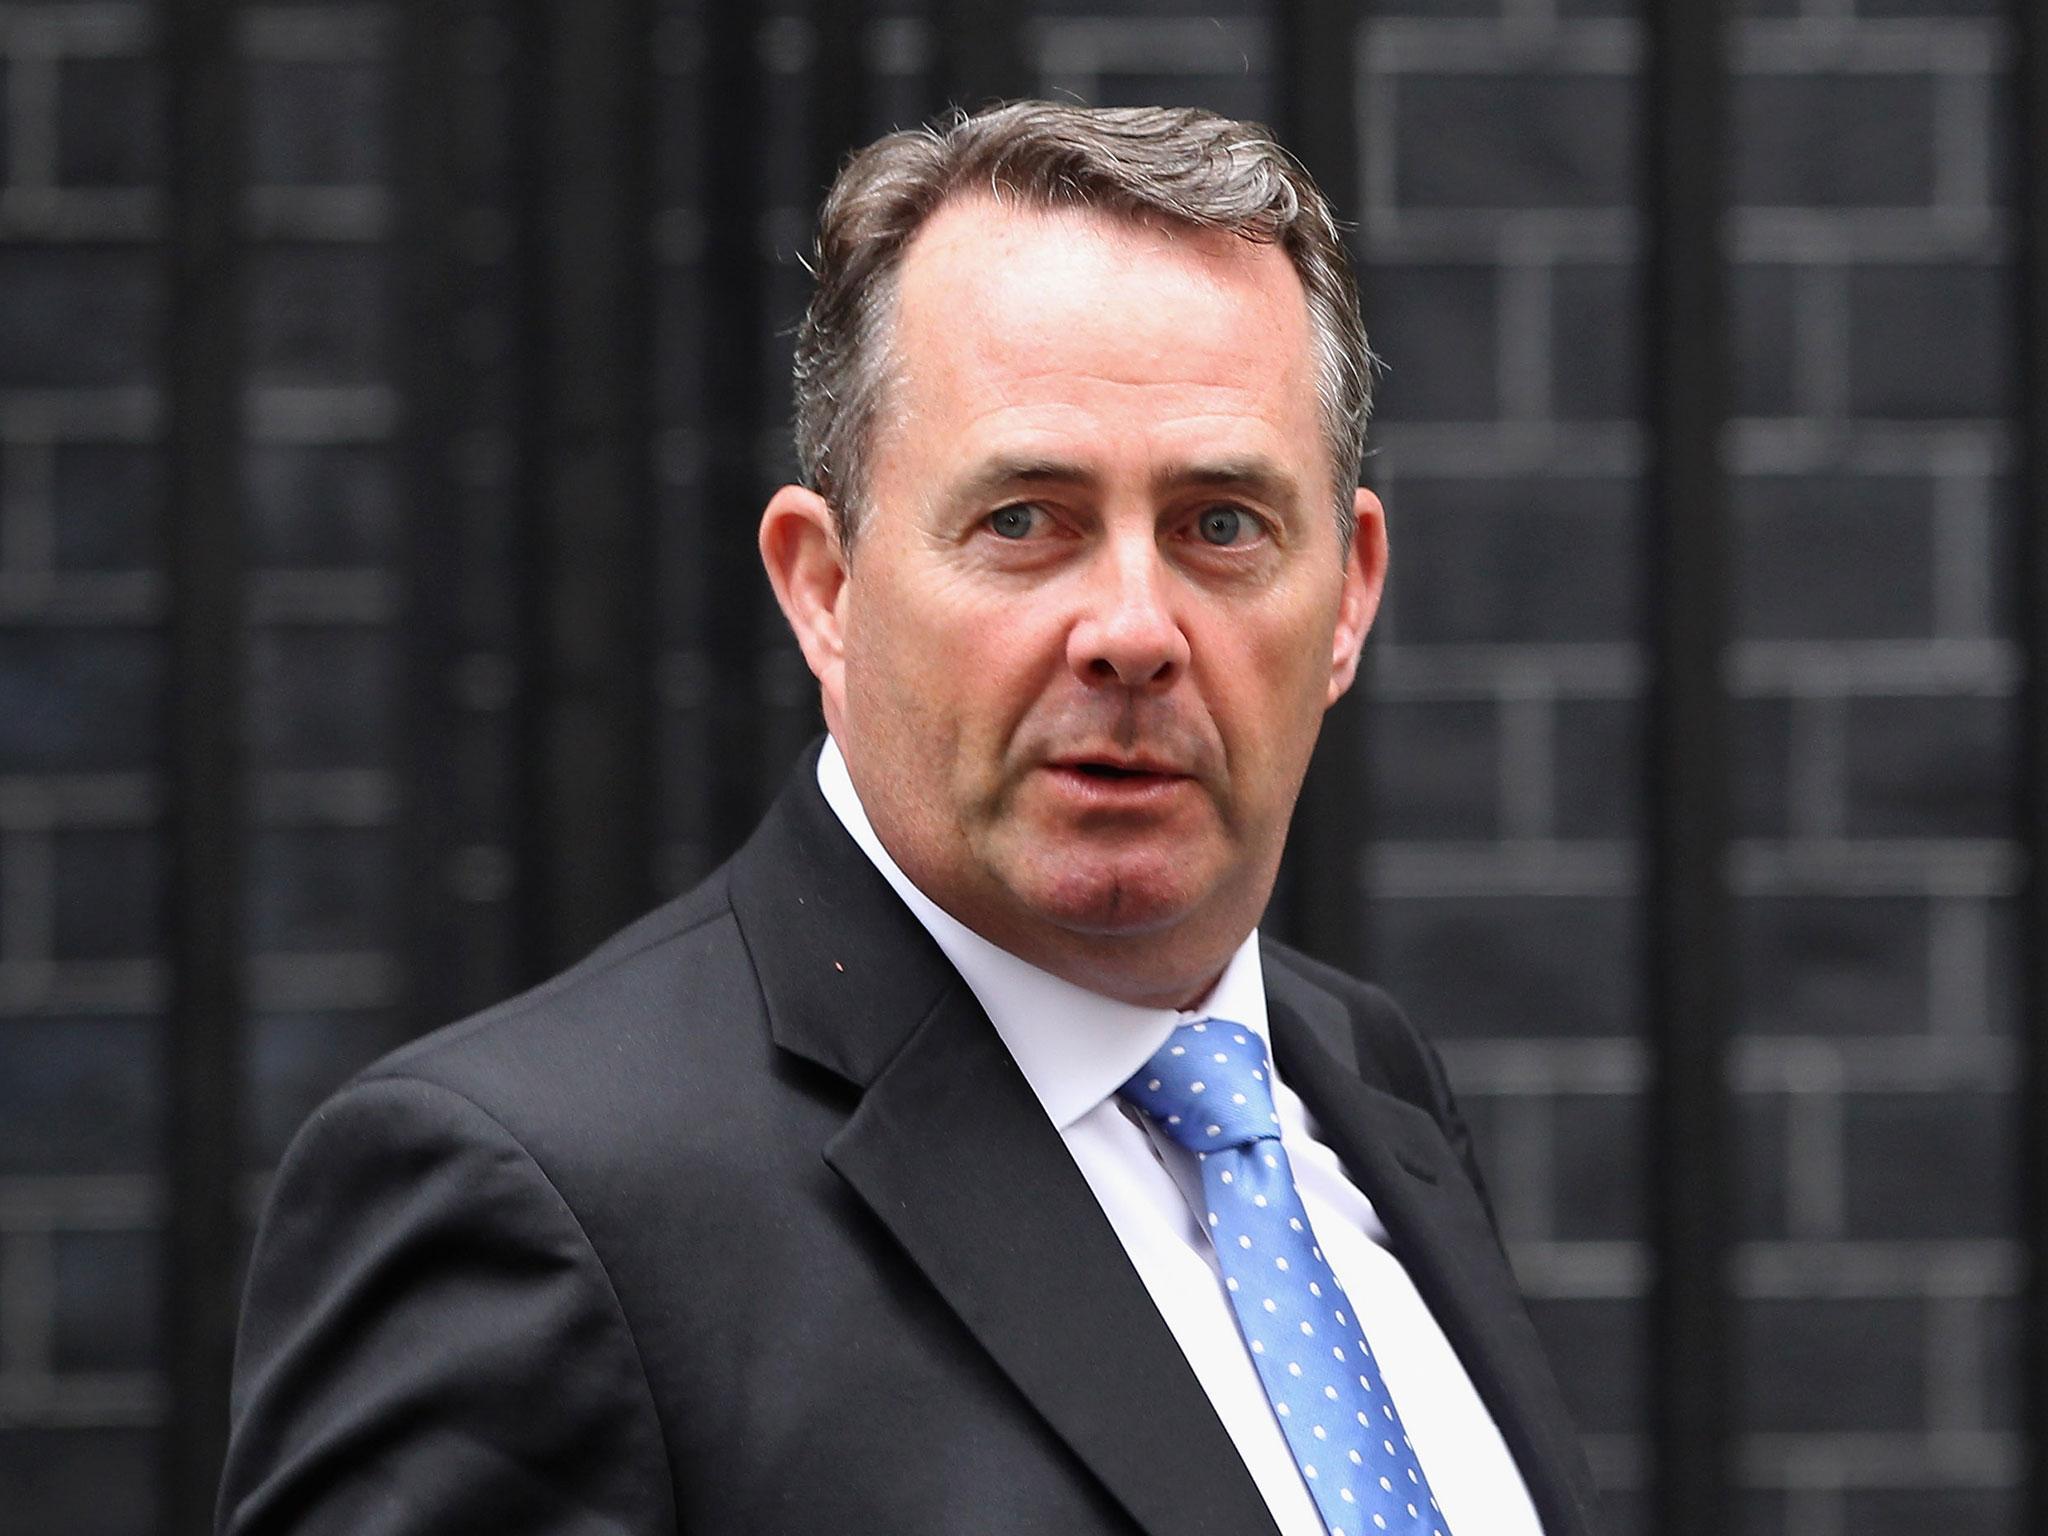 &#13;
Dr Liam Fox, the former Defence Secretary, is another right-wing contender &#13;